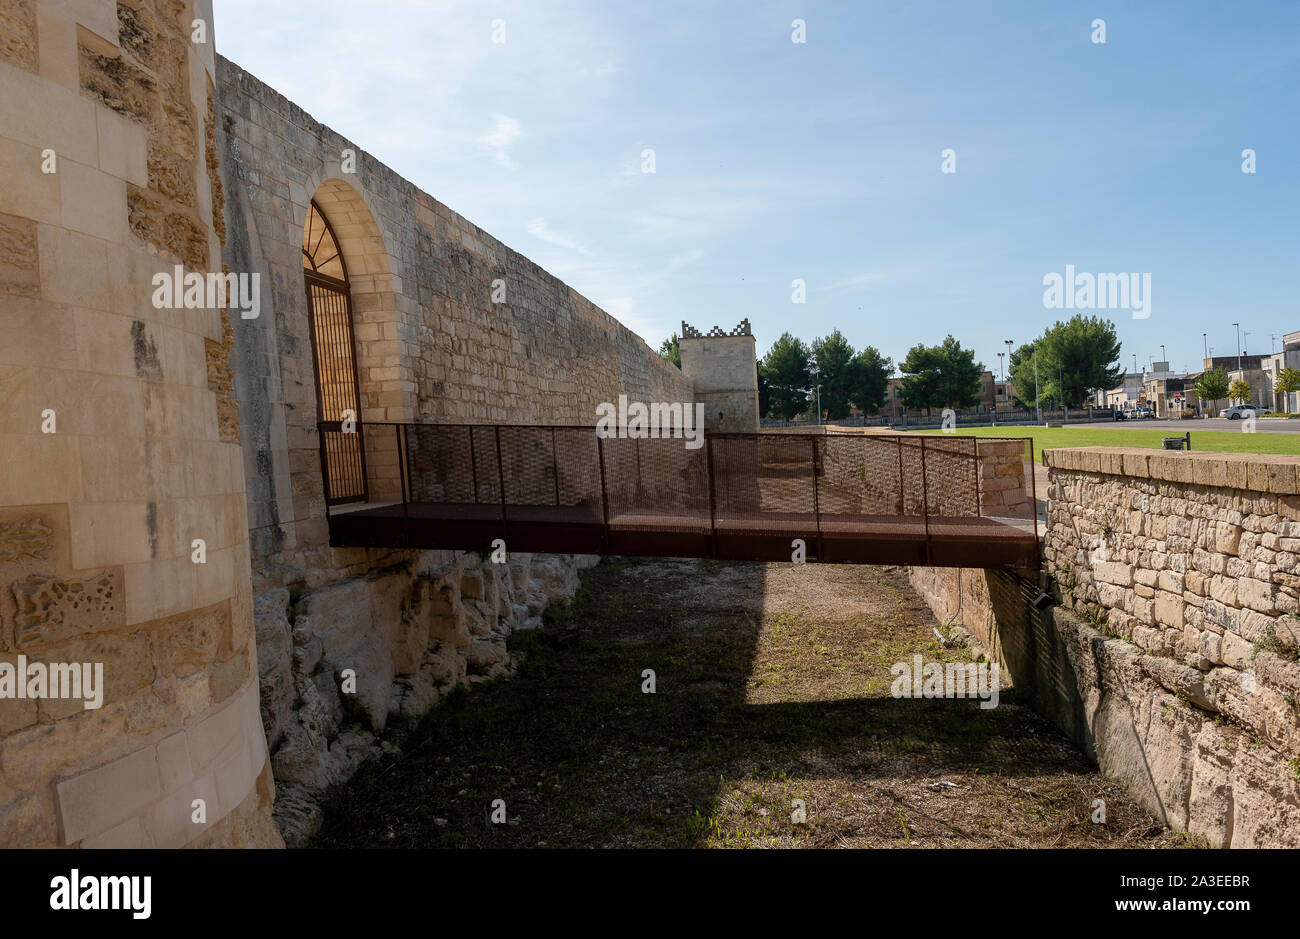 Melpignano. Greek city. Aragonese Castle, view of the perimeter walls and of the ancient phosphate. Pedestrian walkway accessing the castle. Stock Photo